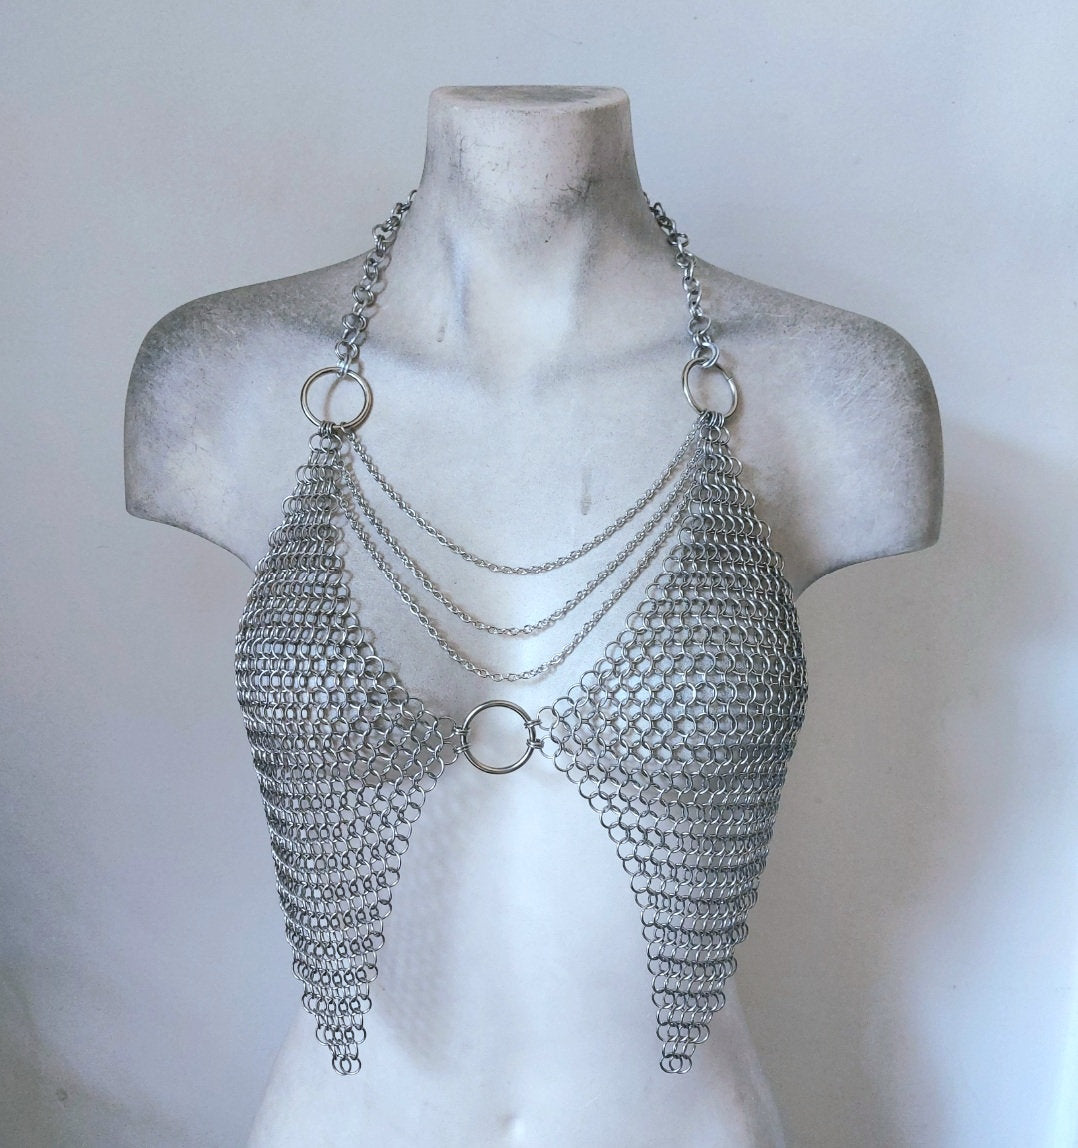 Demeter Warrior Chainmail Festival Top – syntheticdaisydesign